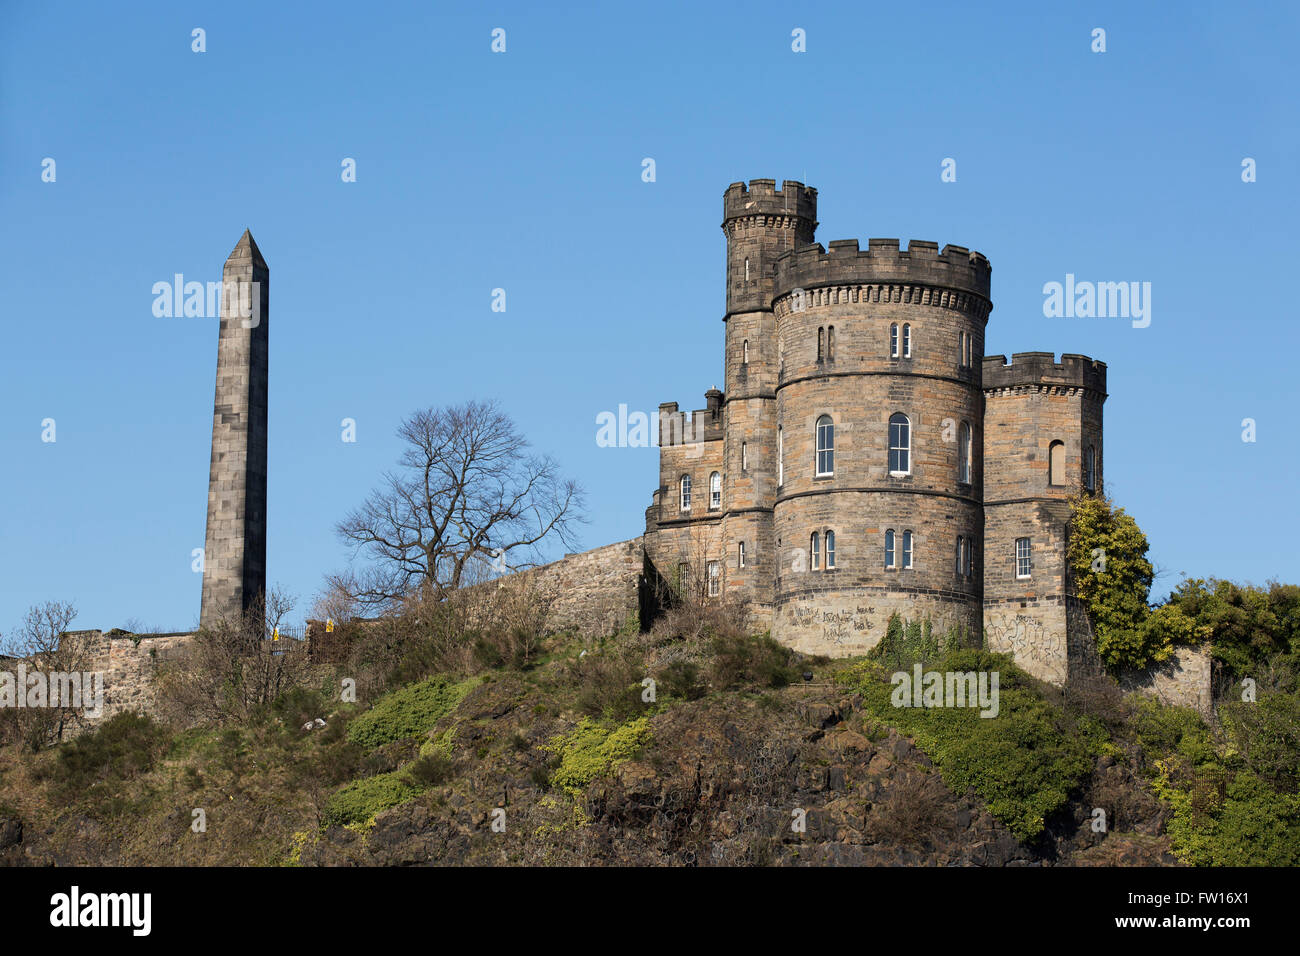 The obelisk known as the Martyr's Monument and Governor's House on Calton Hill in Edinburgh, Scotland. They stand in and next to Stock Photo